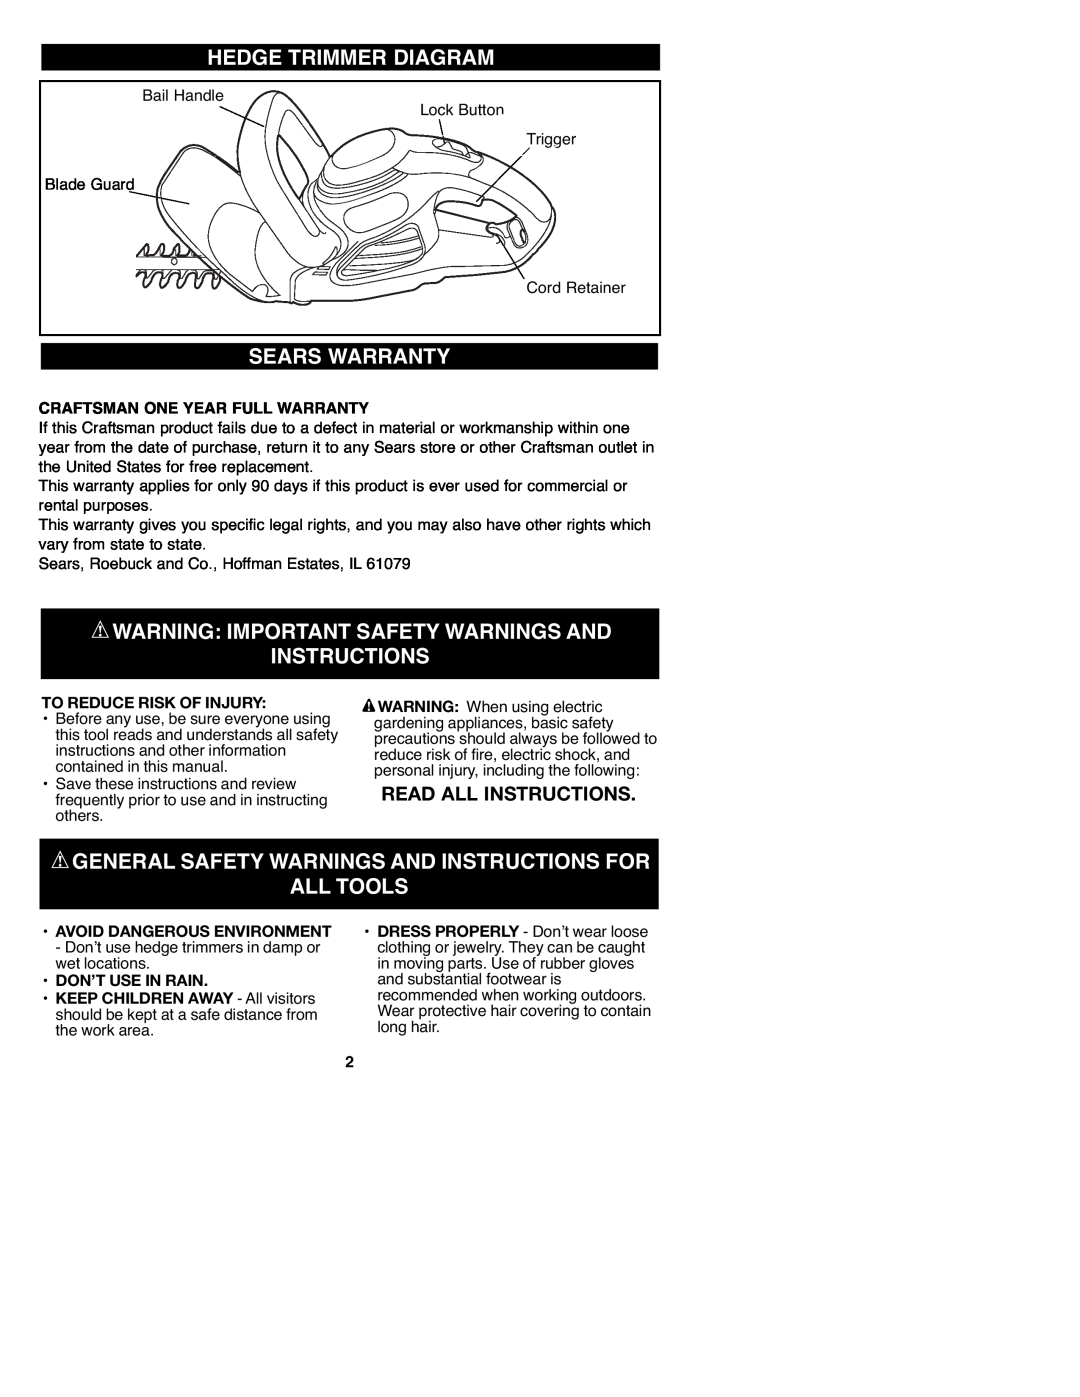 Craftsman 900 Hedge Trimmer Diagram, Sears Warranty, Warning: Important Safety Warnings And, Instructions, All Tools 